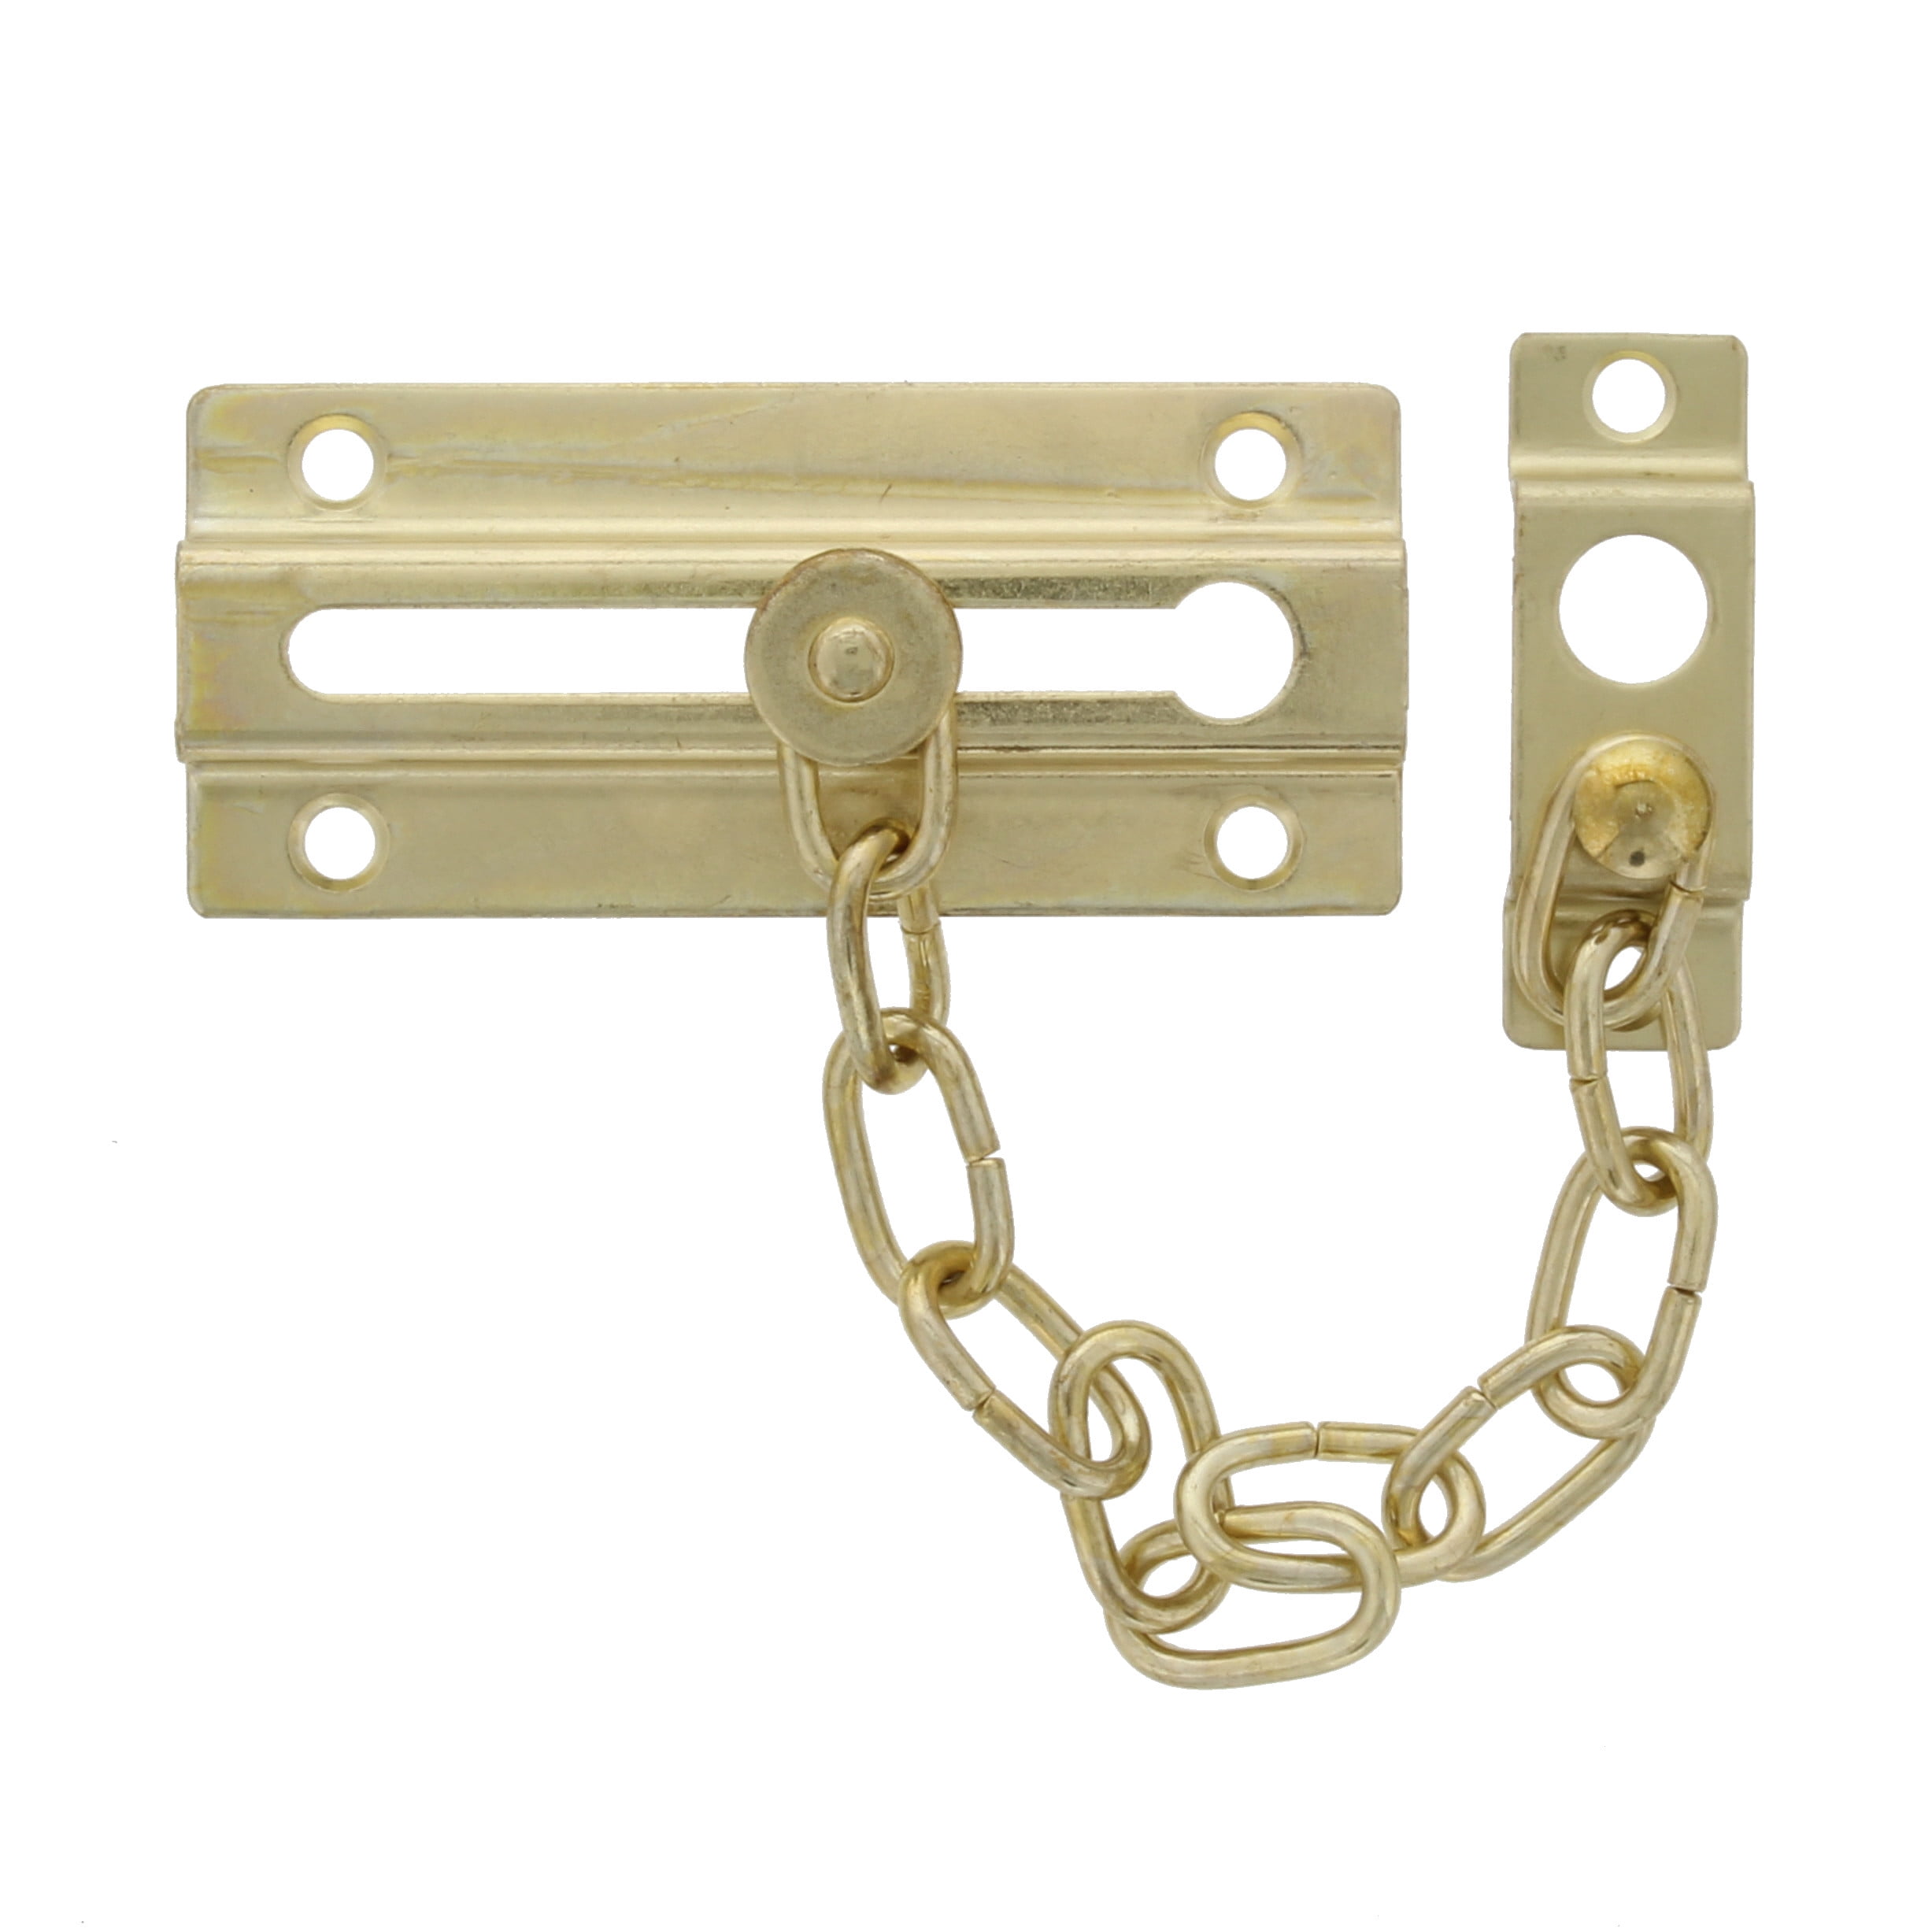 SECURITY BRASS PLATED SAFETY DOOR GUARD like a door chain but Tougher 